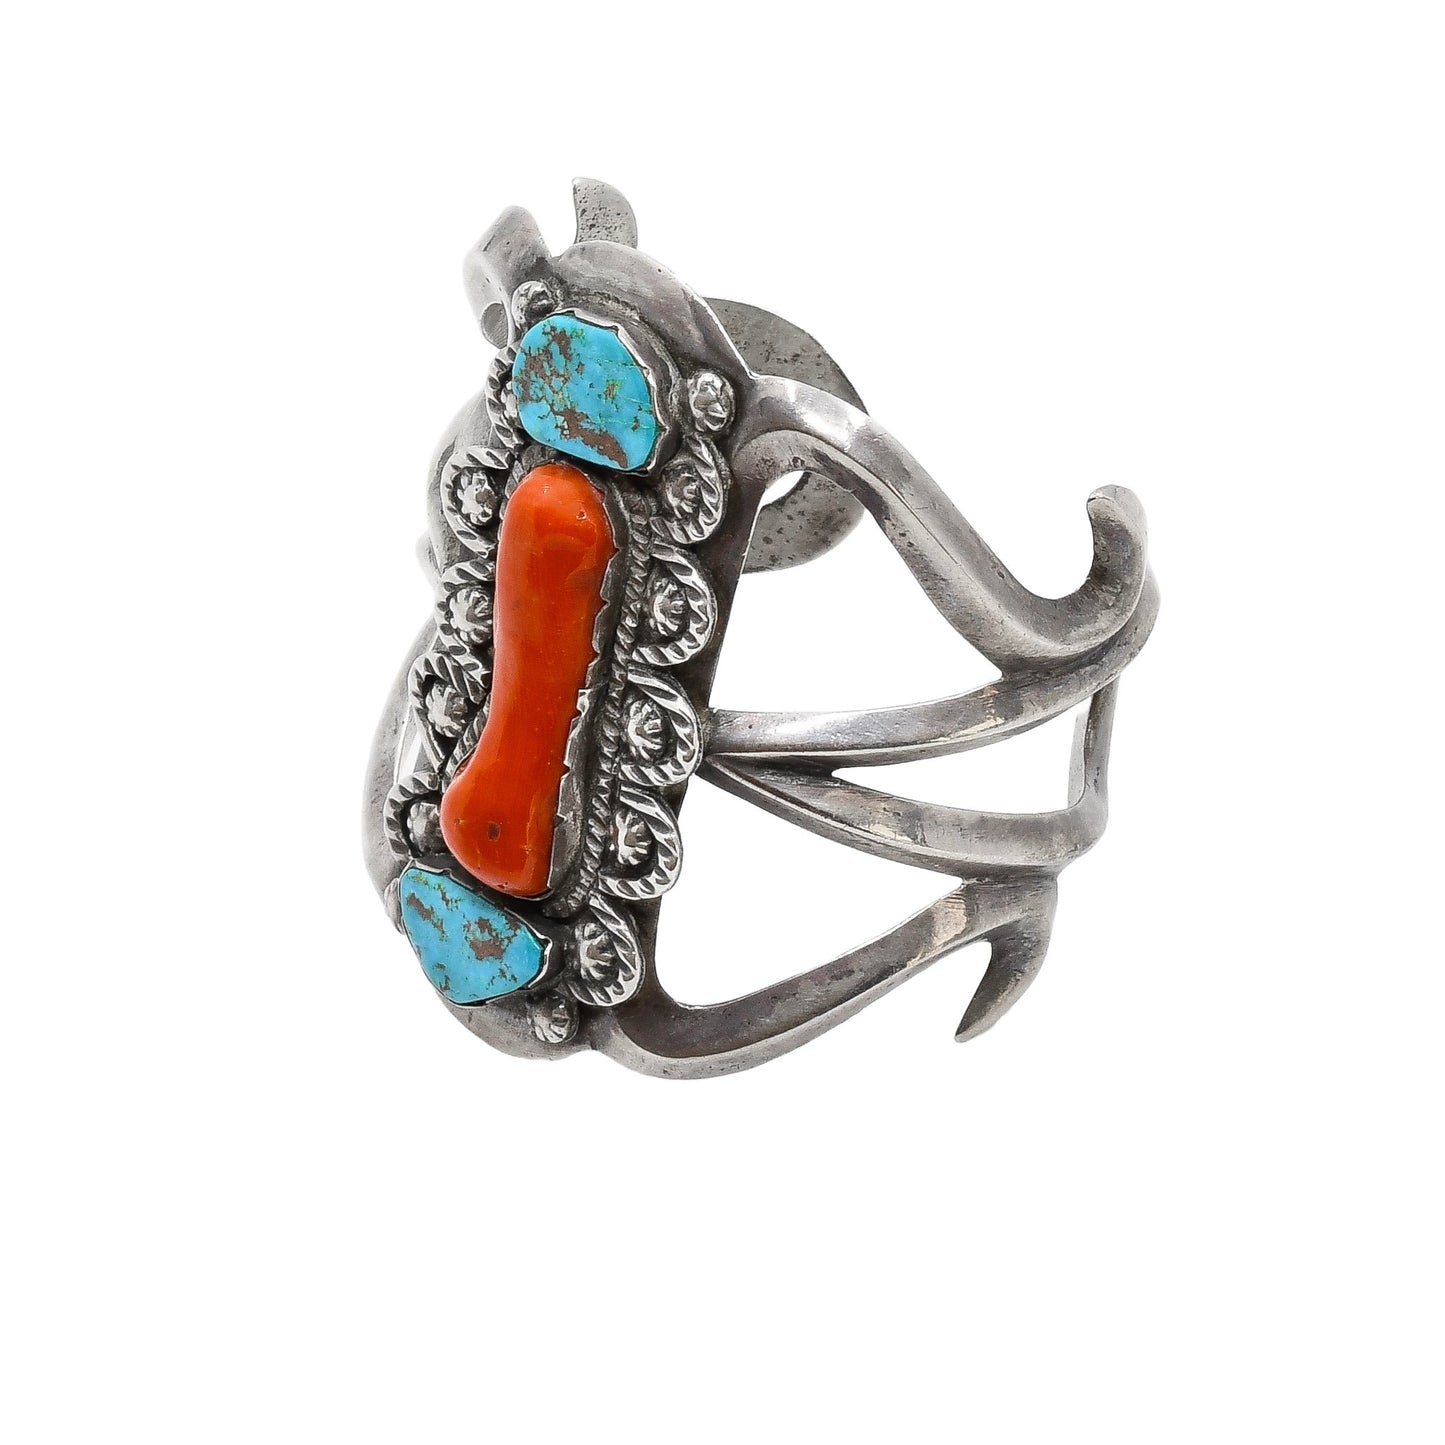 Vintage Wide Tufa Cast Navajo Bracelet With Turquoise and Coral - Turquoise & Tufa